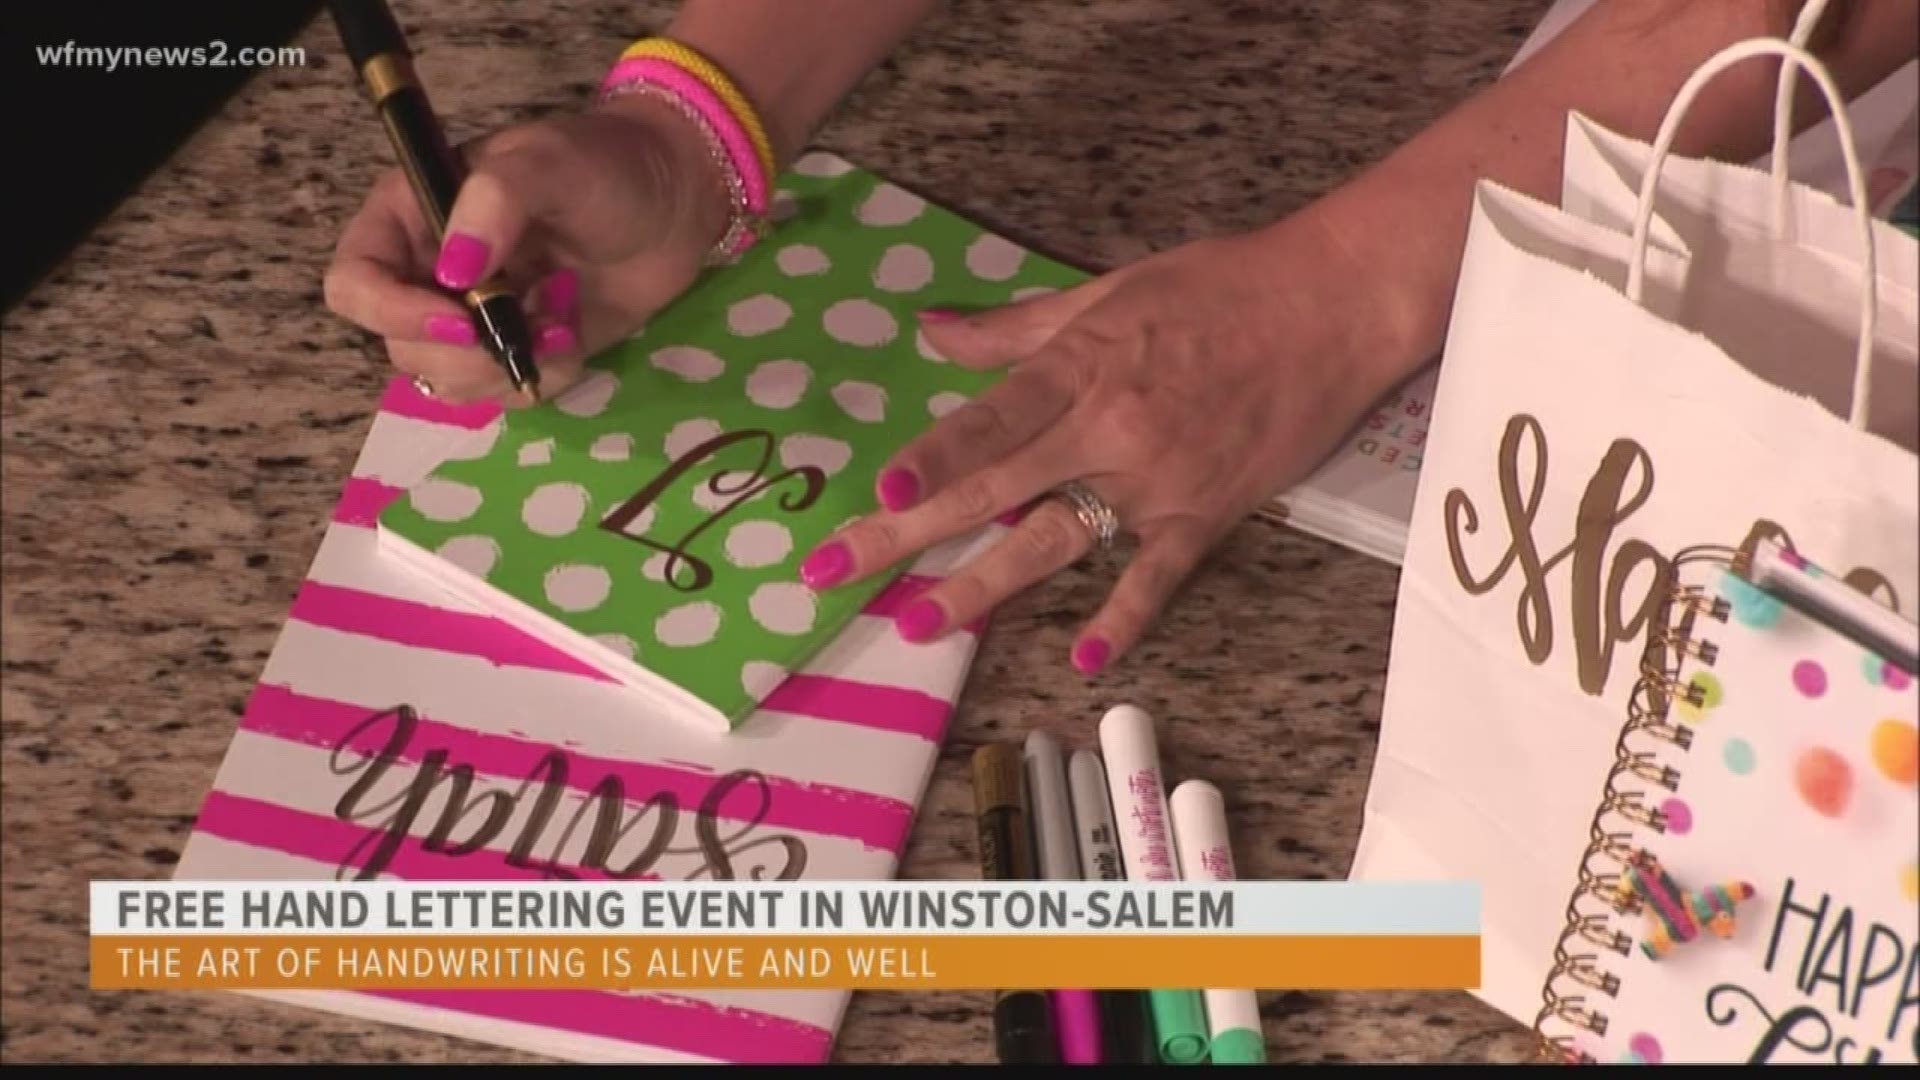 A North Carolina woman has made a booming business and even written a book as part of her mission to spread happiness through penmanship.